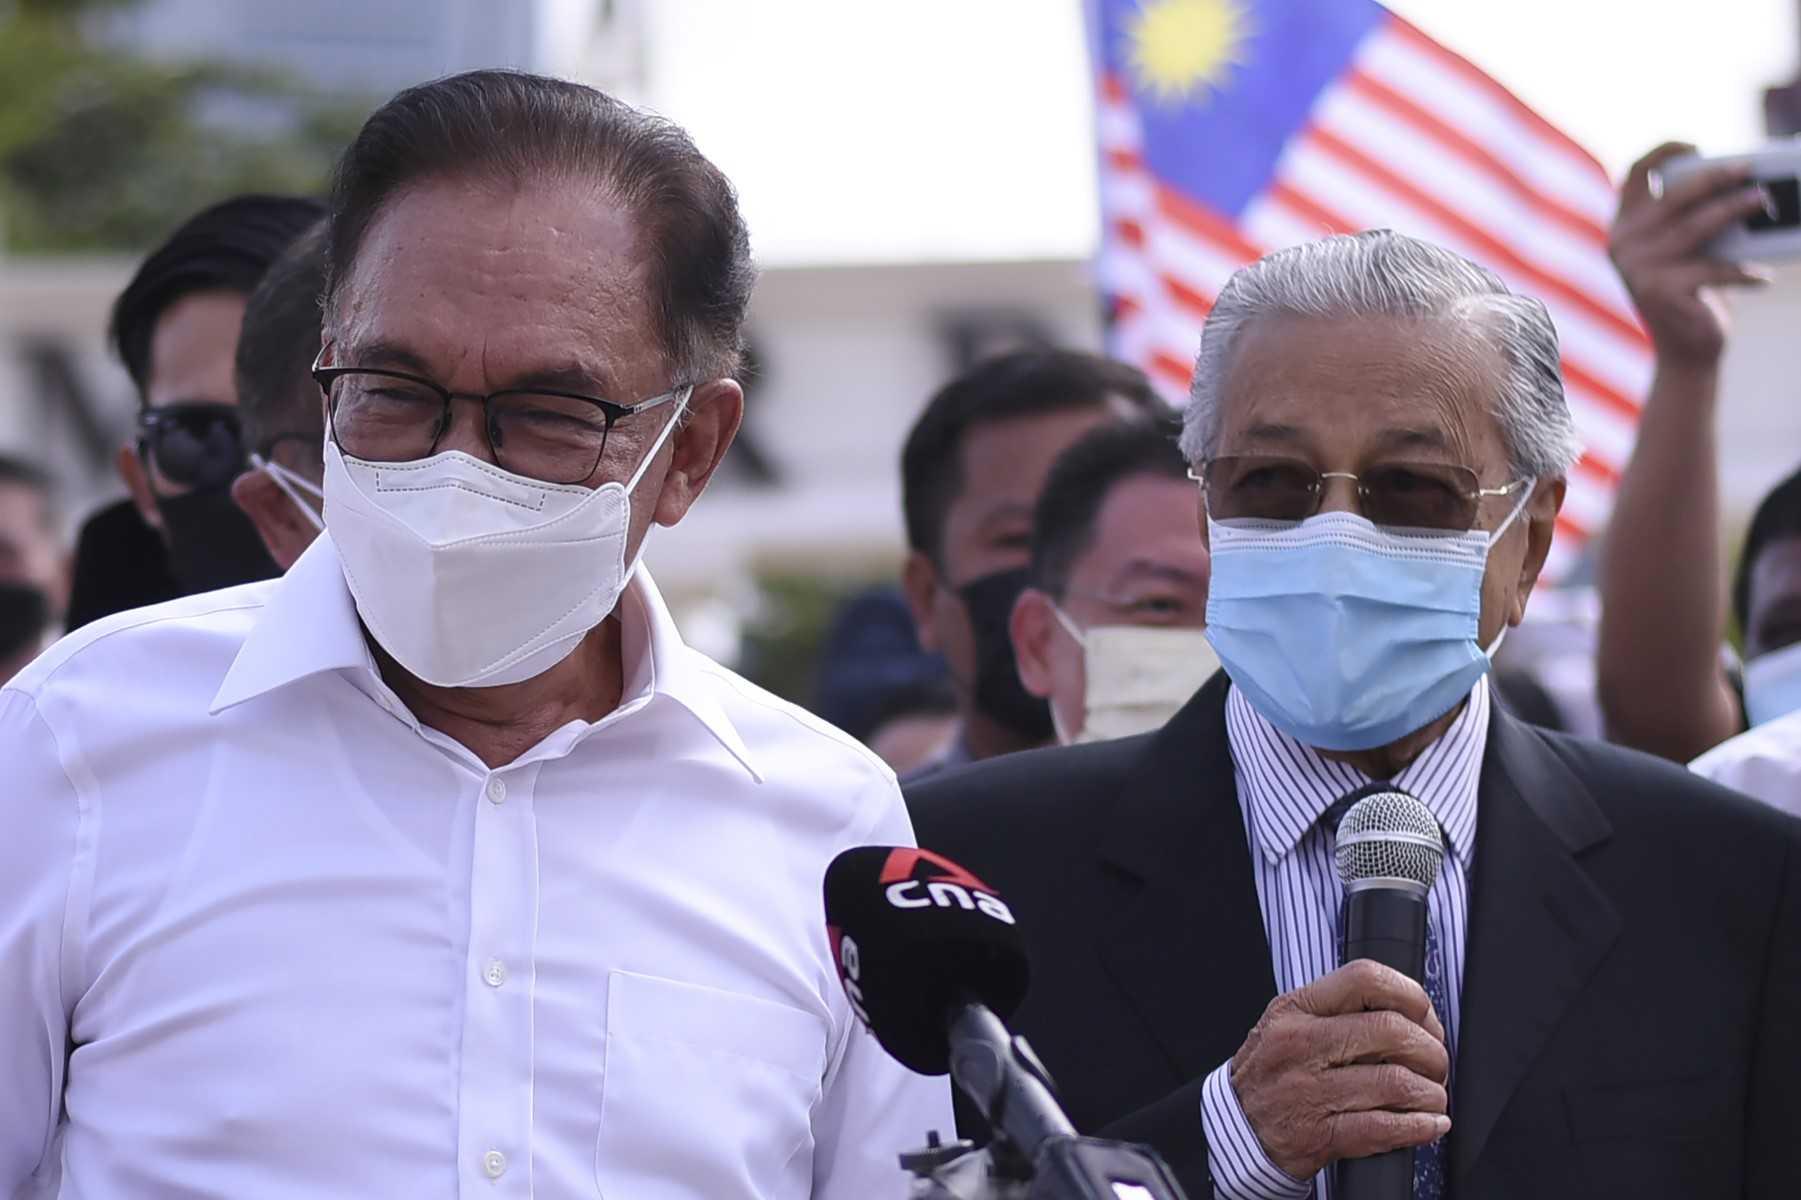 Former prime minister Dr Mahathir Mohamad with PKR president Anwar Ibrahim at a protest against the closure of Parliament in Kuala Lumpur, on Aug 2, 2021. Photo: AFP